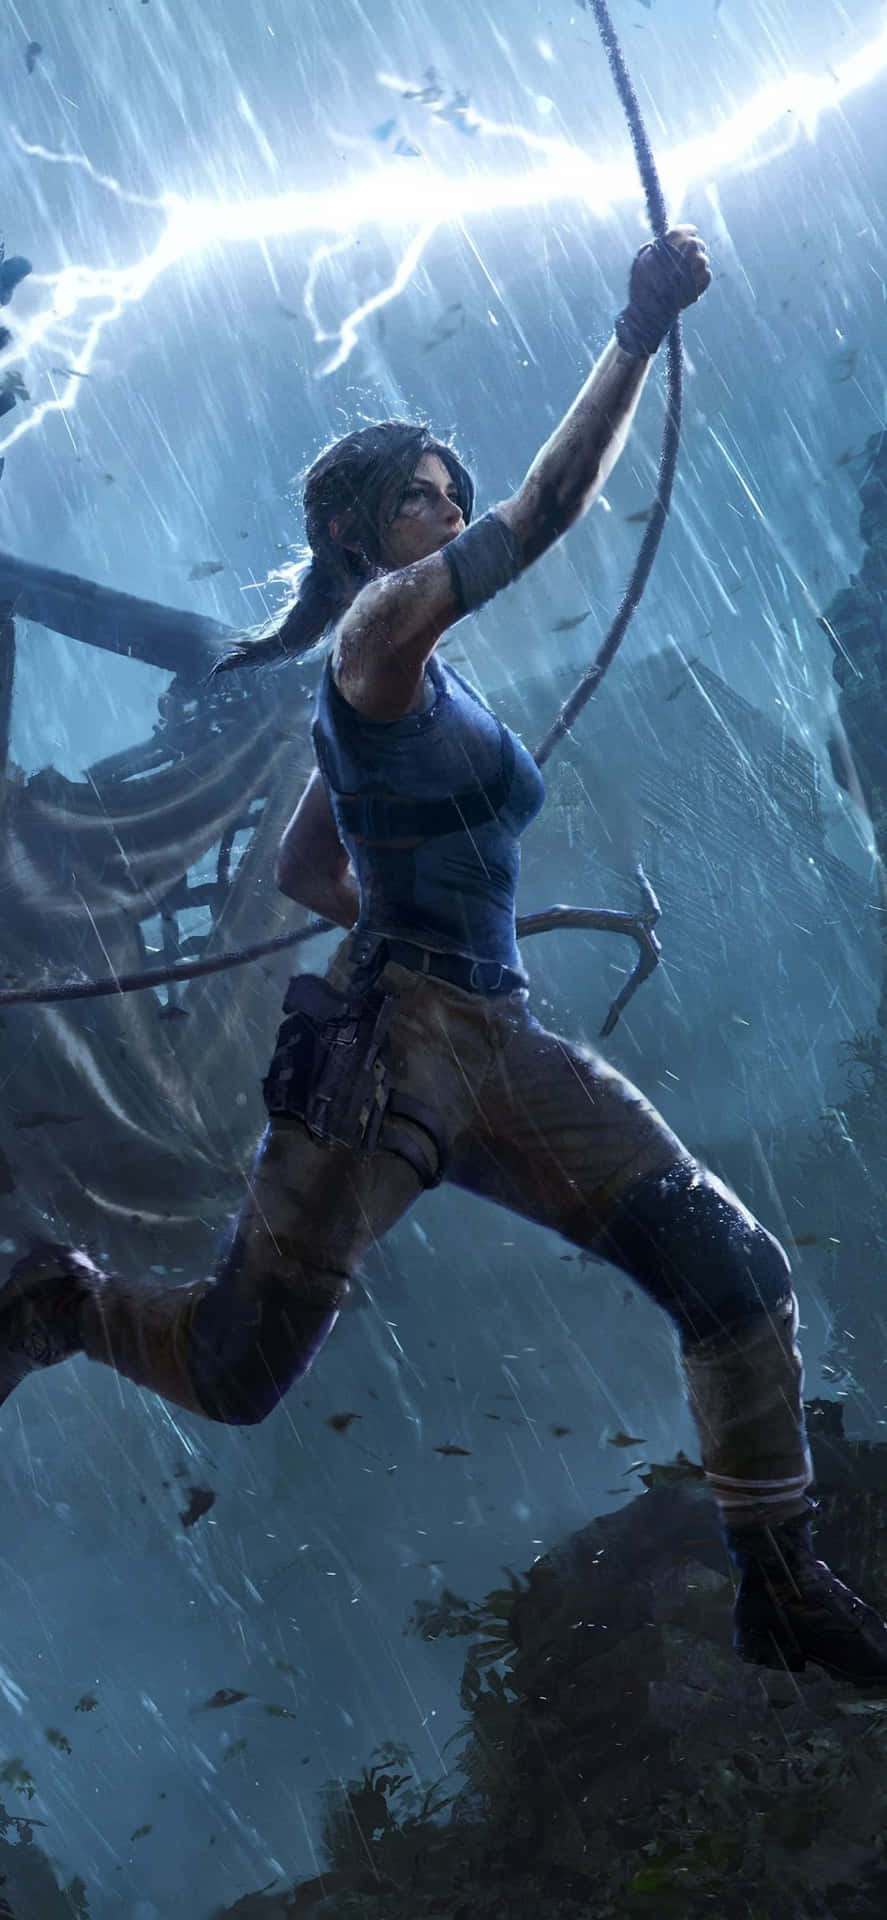 The Tomb Raider Is Running In The Rain With A Lightning Bolt Wallpaper